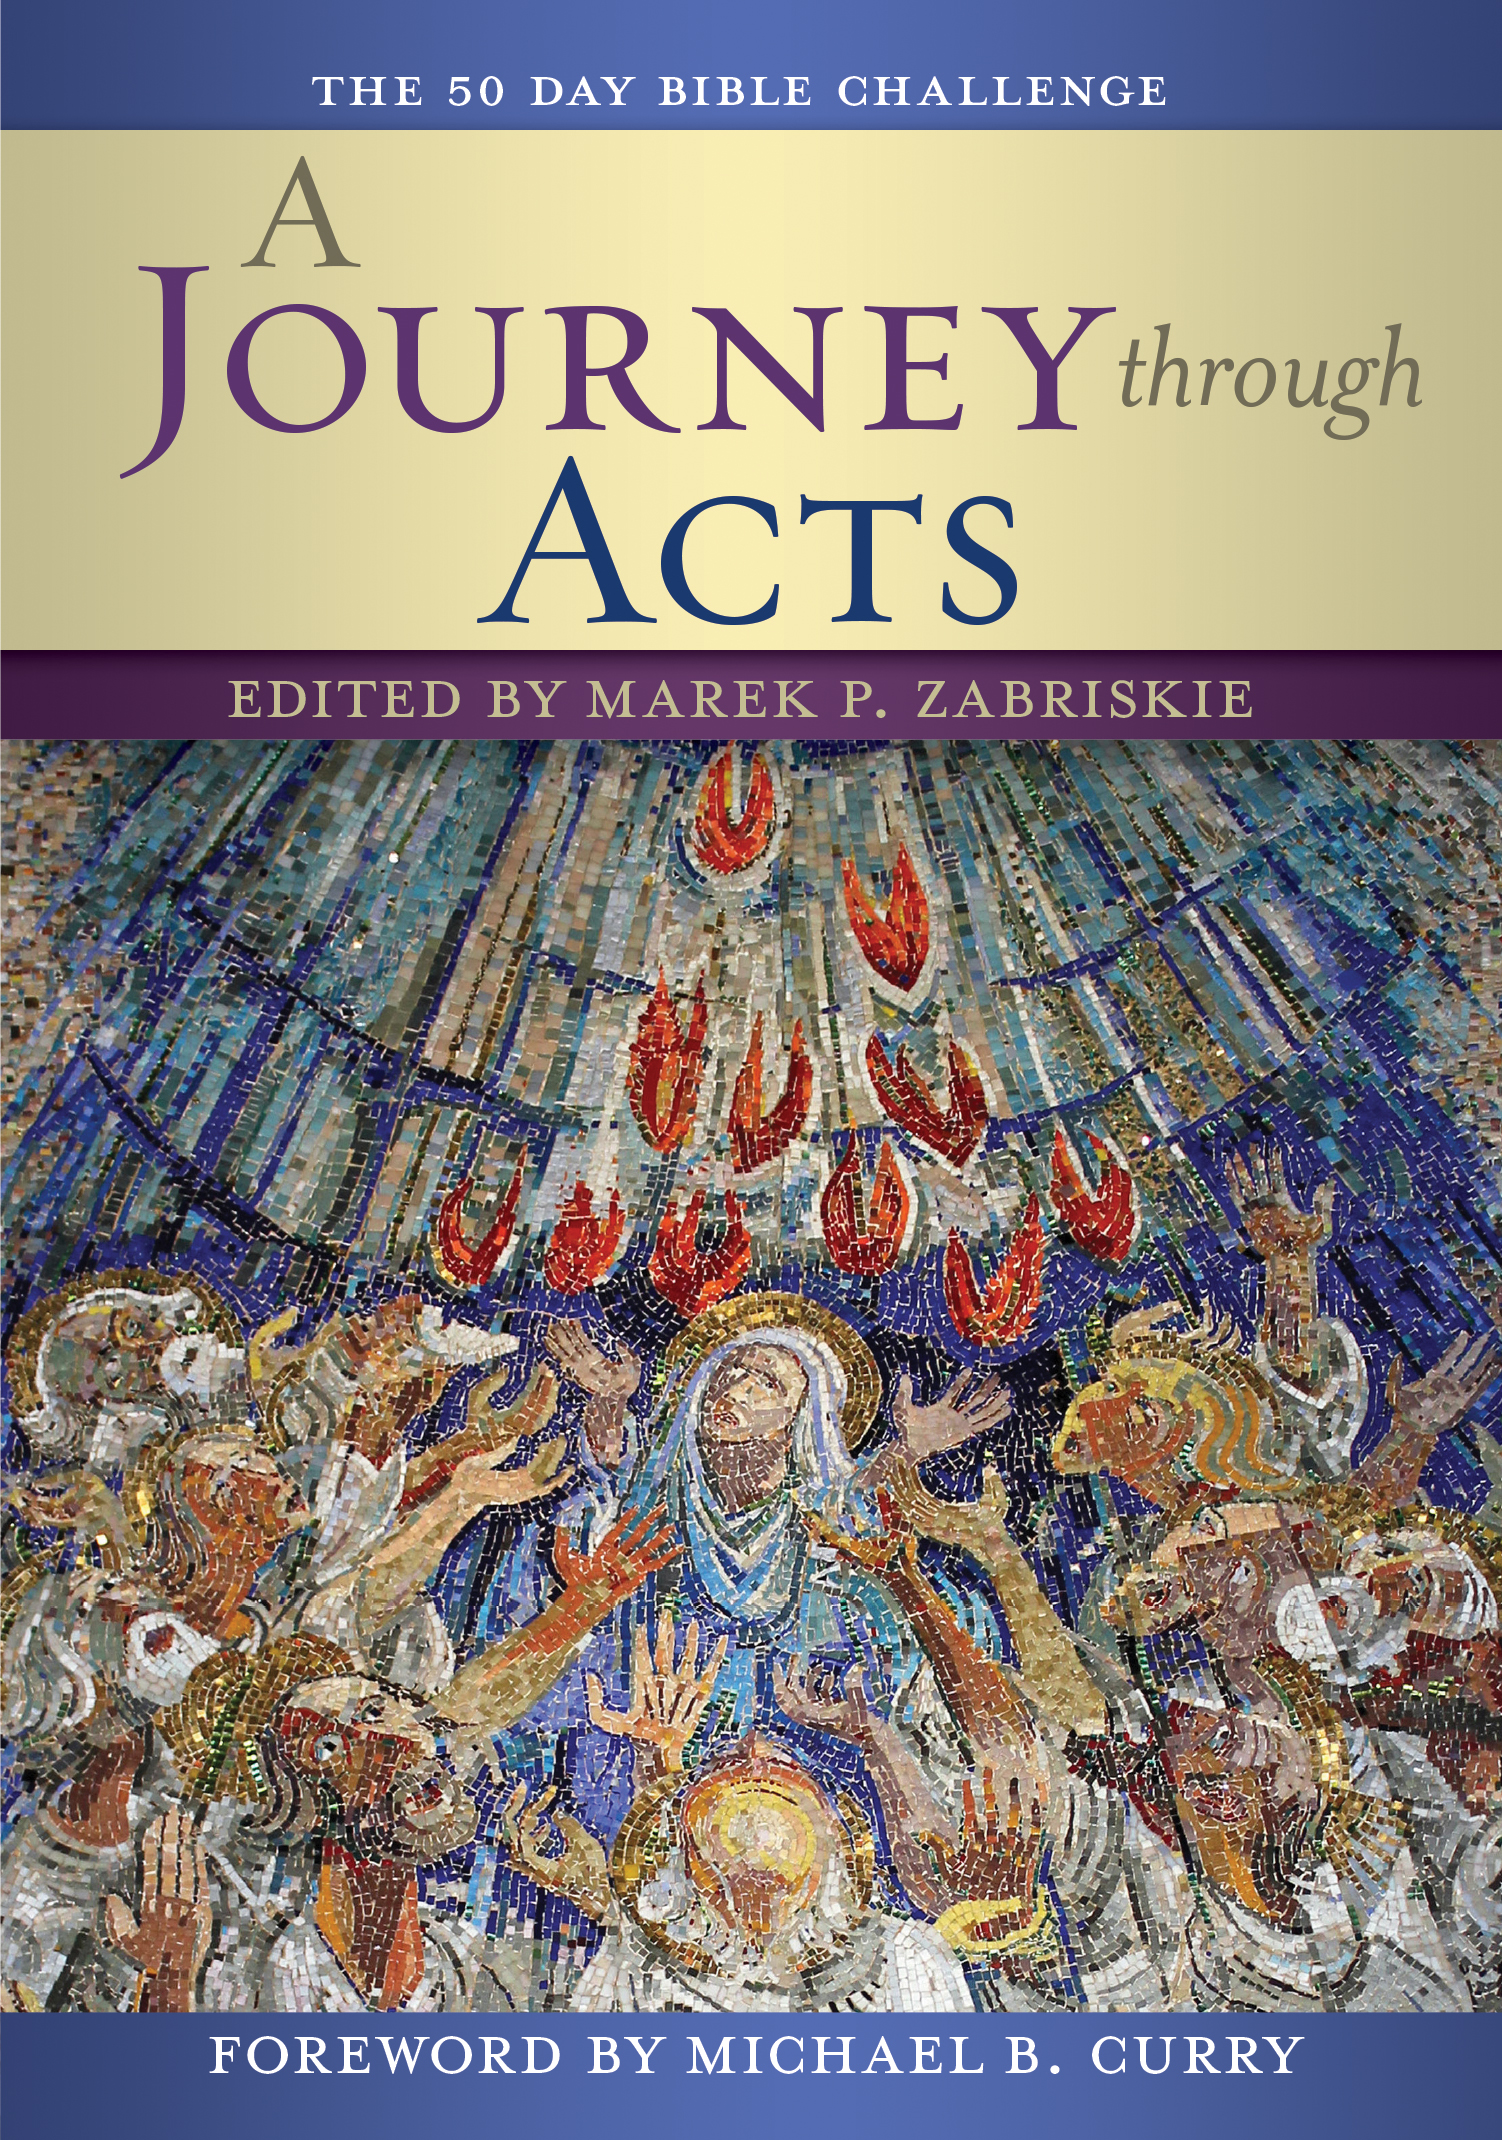 A Journey through Acts